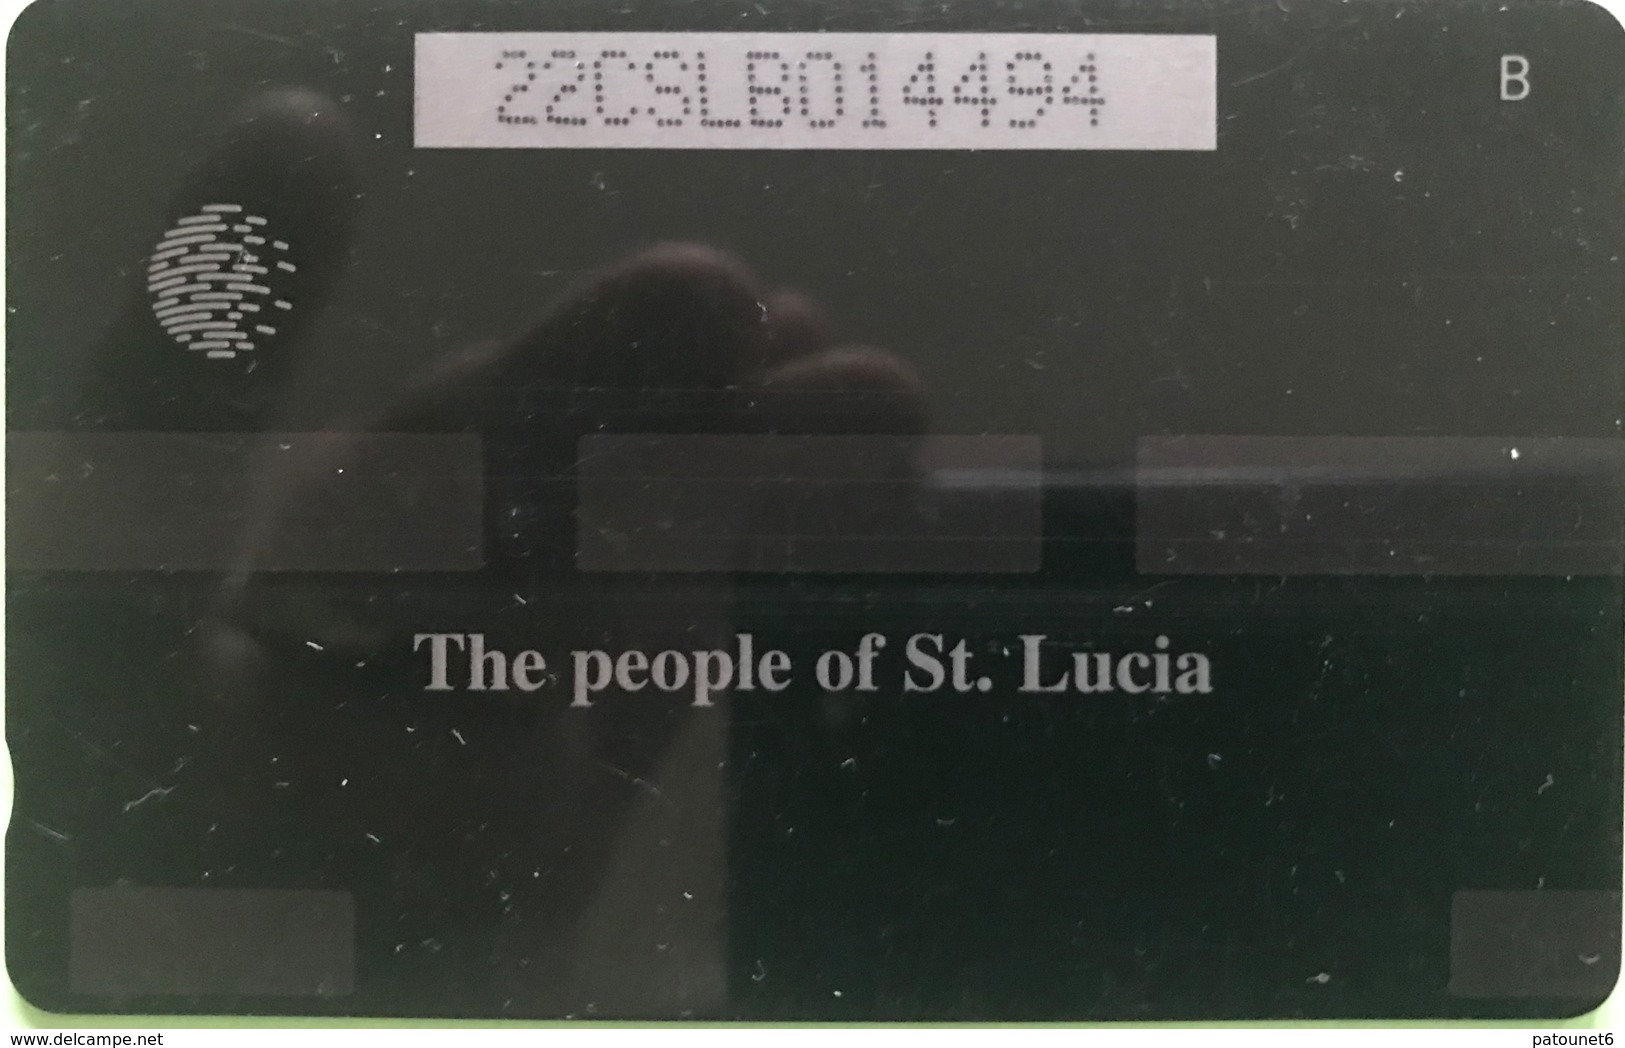 SAINTE LUCIE  -  Phonecard  - Cable & Wireless   - The People Of St. Lucia  -  EC $ 20 - St. Lucia